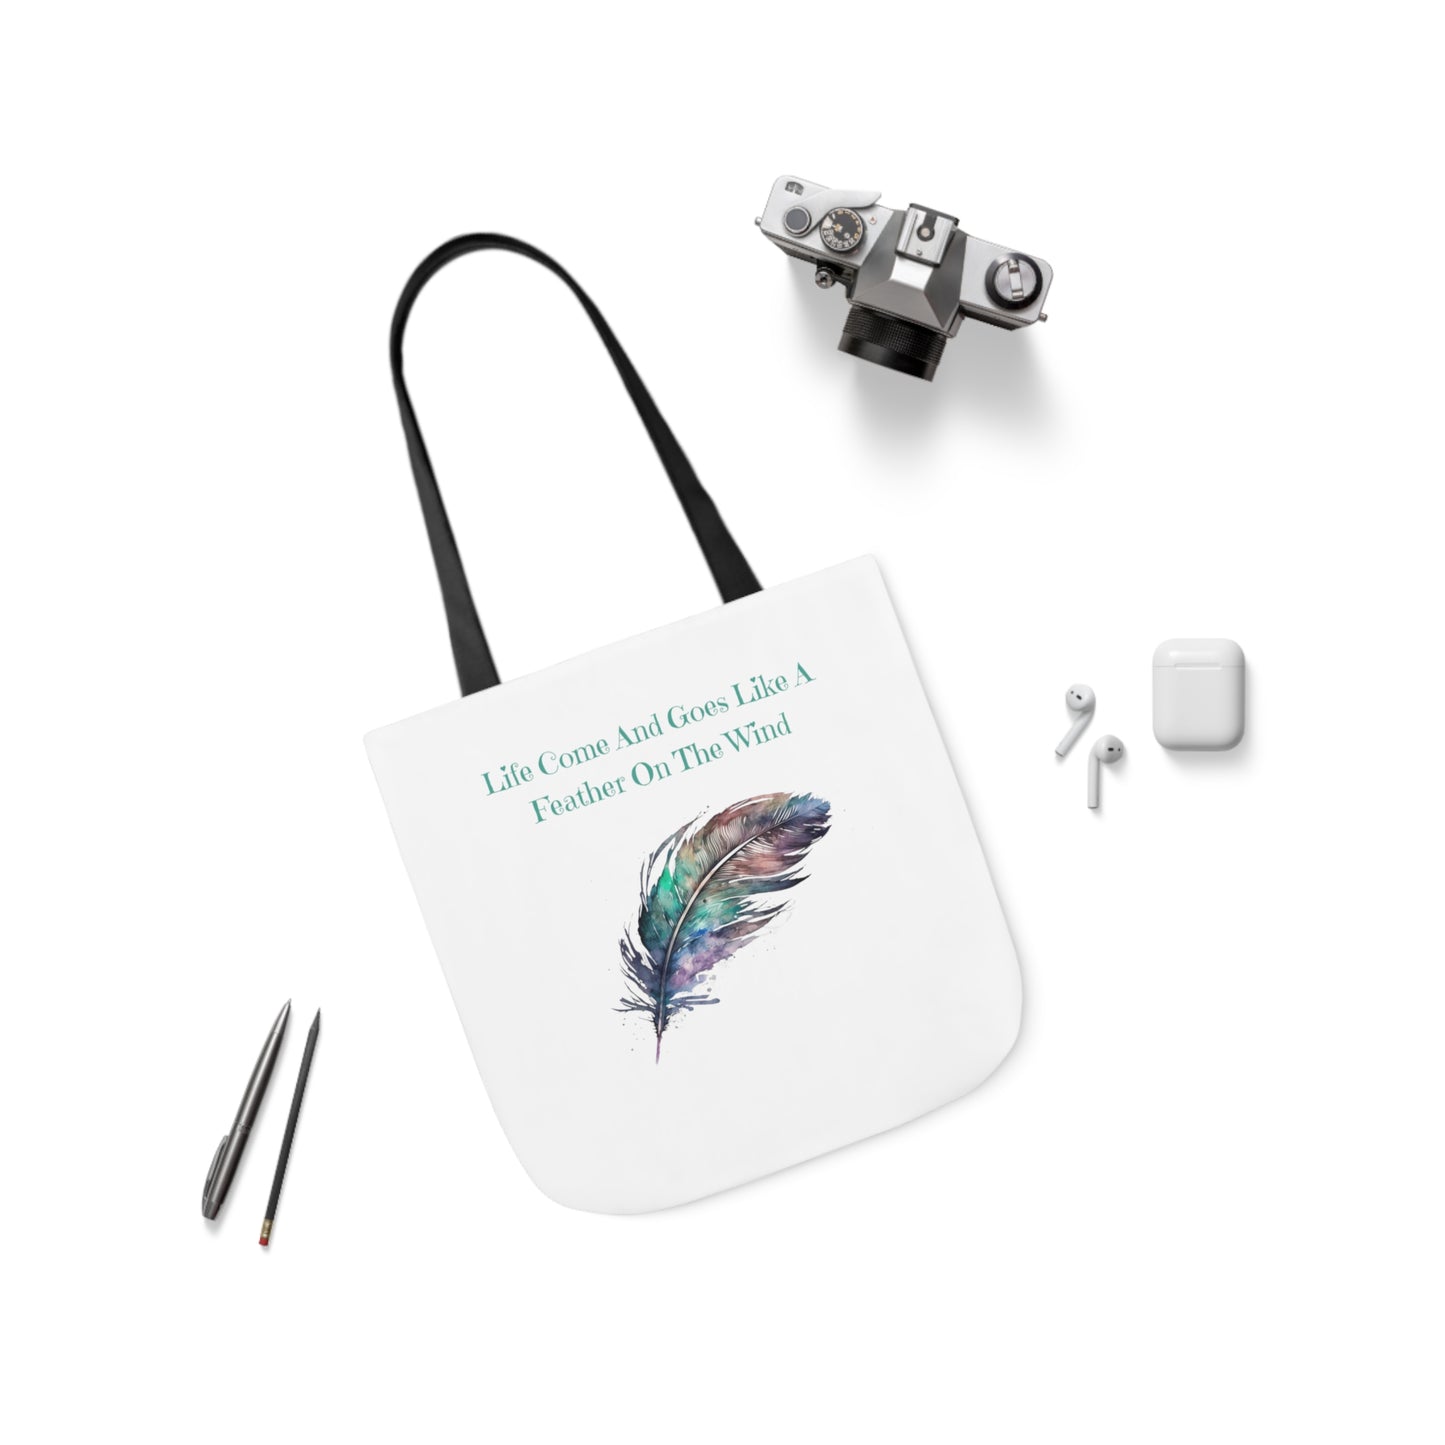 Feather On The Wind Canvas Tote Bag